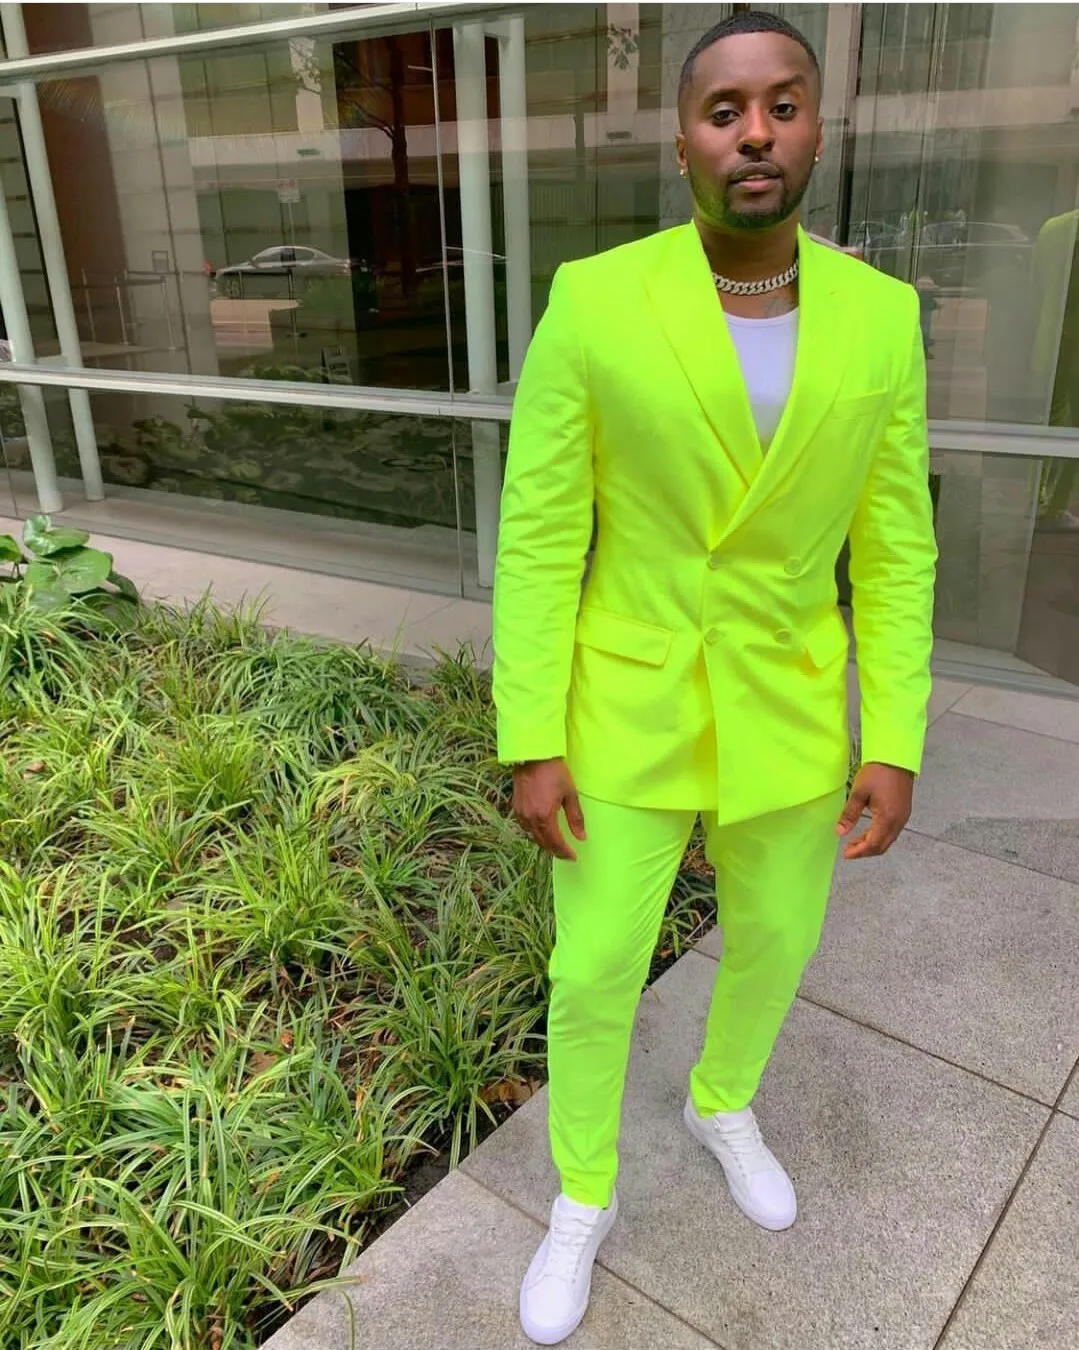 Fluorescent Green Men's Suit Jacket and Pant Set, Double Breasted Custom  Made Formal Suits for Wedding and Business